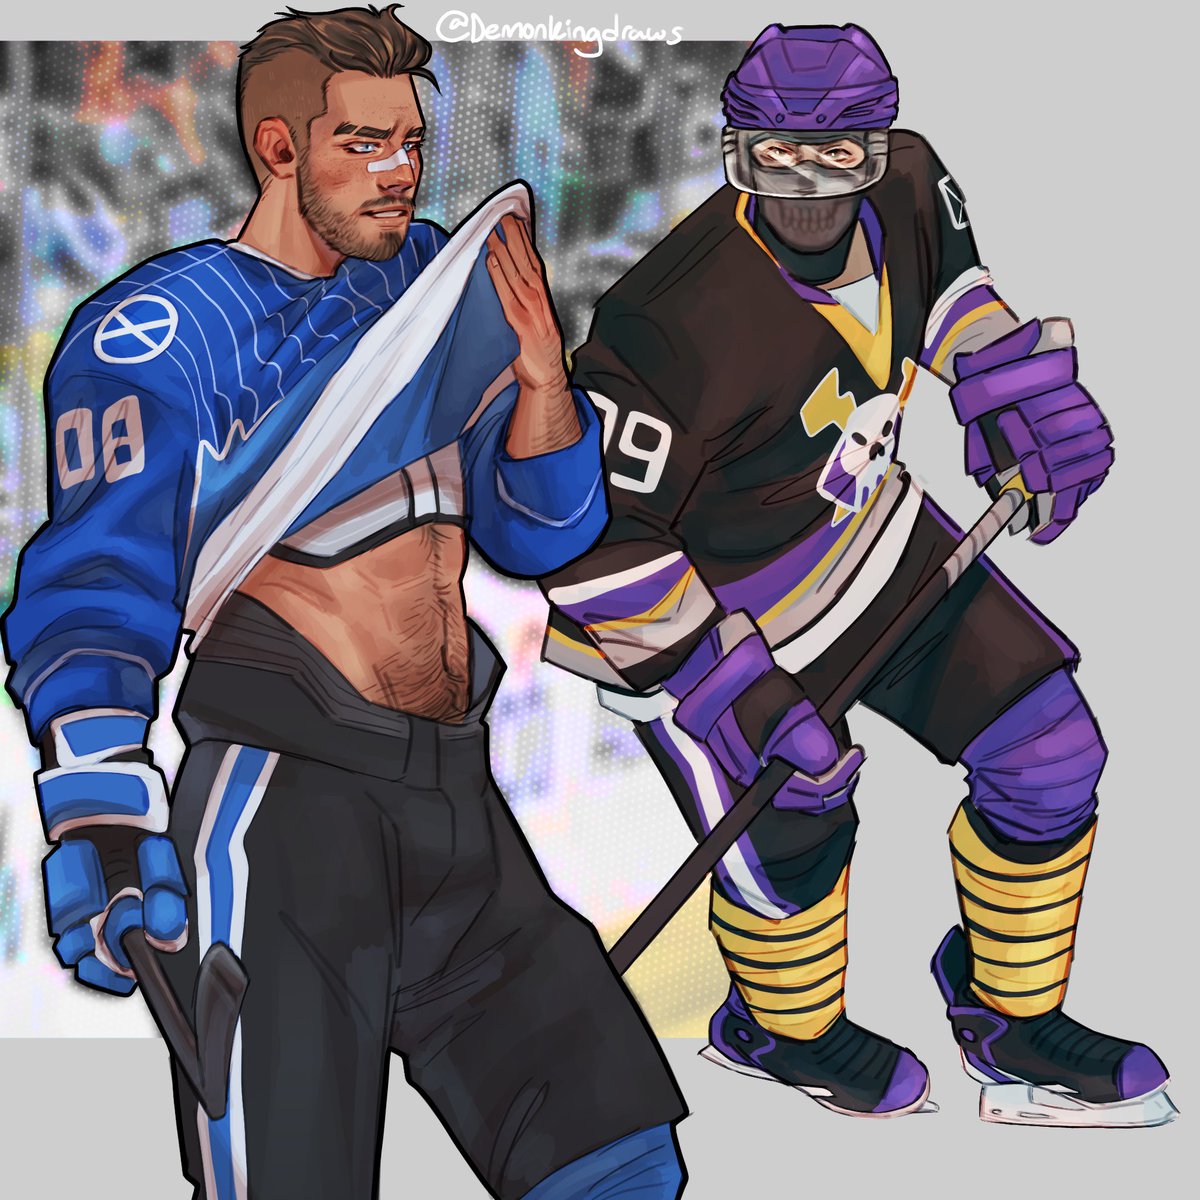 Hockey AU soap ghost 💃 I was trying to look up manchesters colors and found out they have a team so ghosts is Manchester storm! I didn’t look up a Scottish team so soap is kinda boring sorry 😔 #mw3